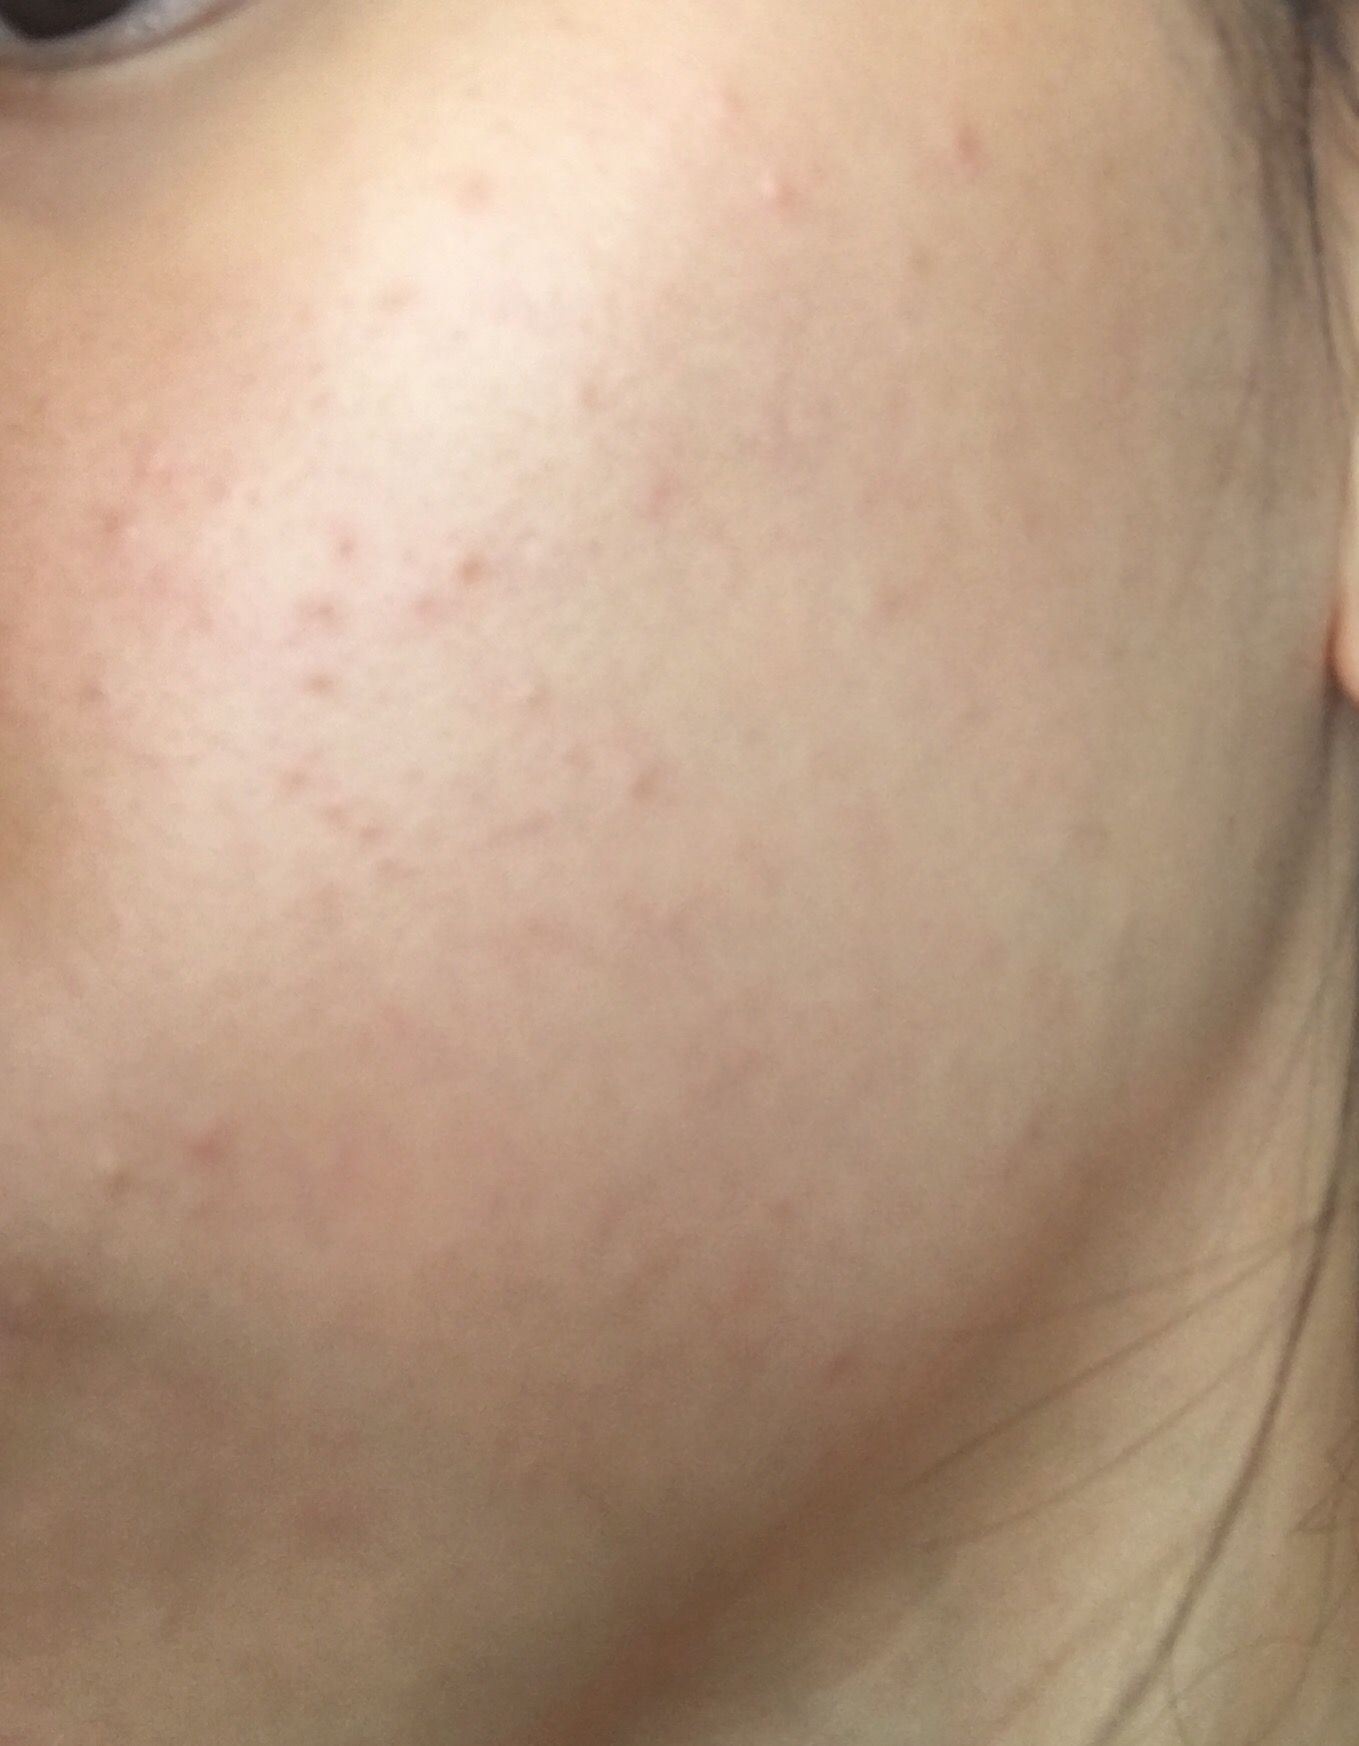 Pimples On My Face That Wonâ€™t Seem To Clear Help General Acne